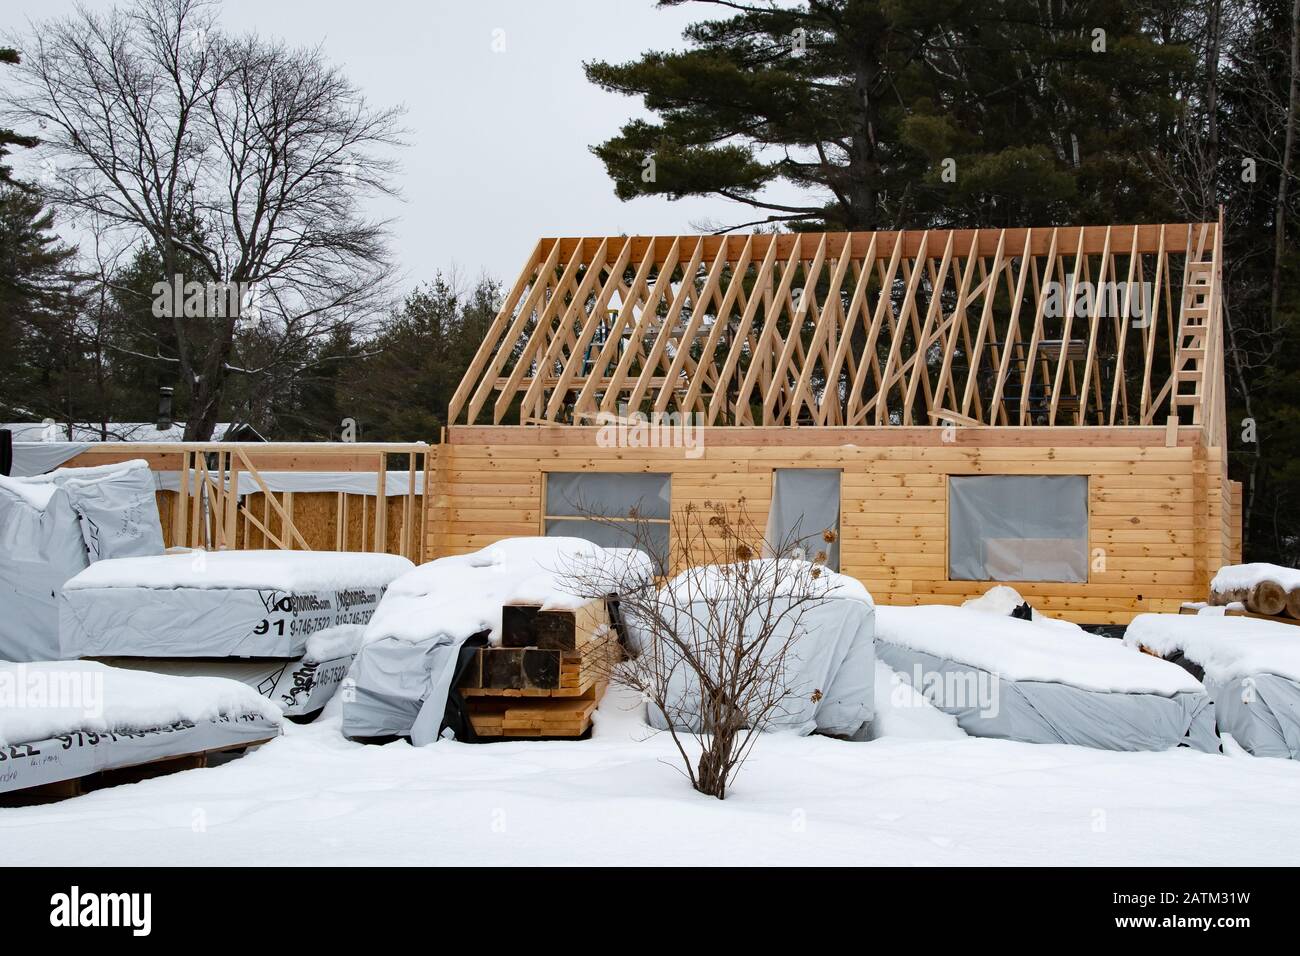 A prefabricated log home under construction during the winter in Speculator, NY USA in the Adirondack Mountains. Stock Photo